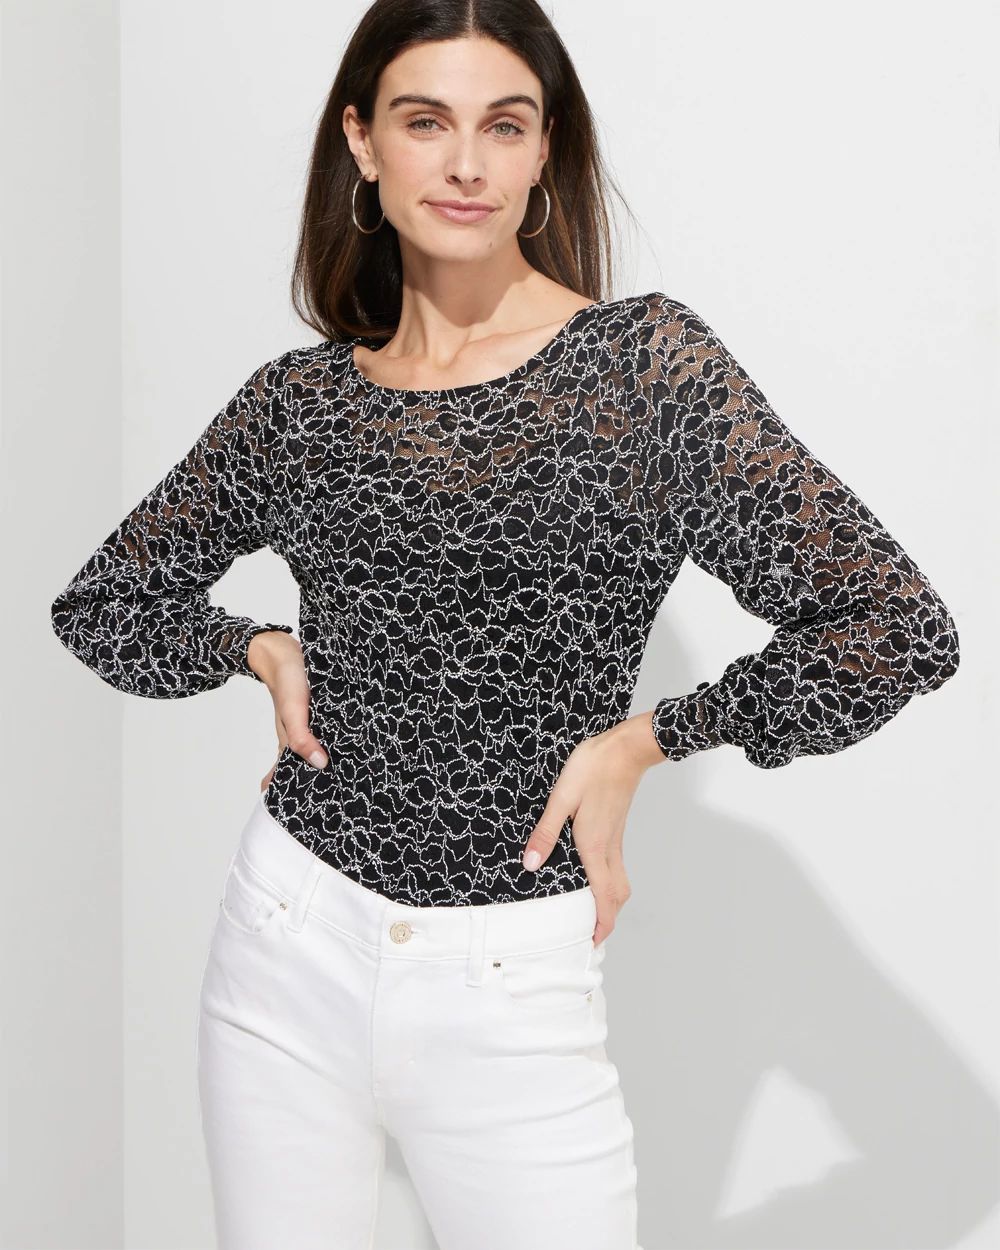 Outlet WHBM Raschel Lace Top